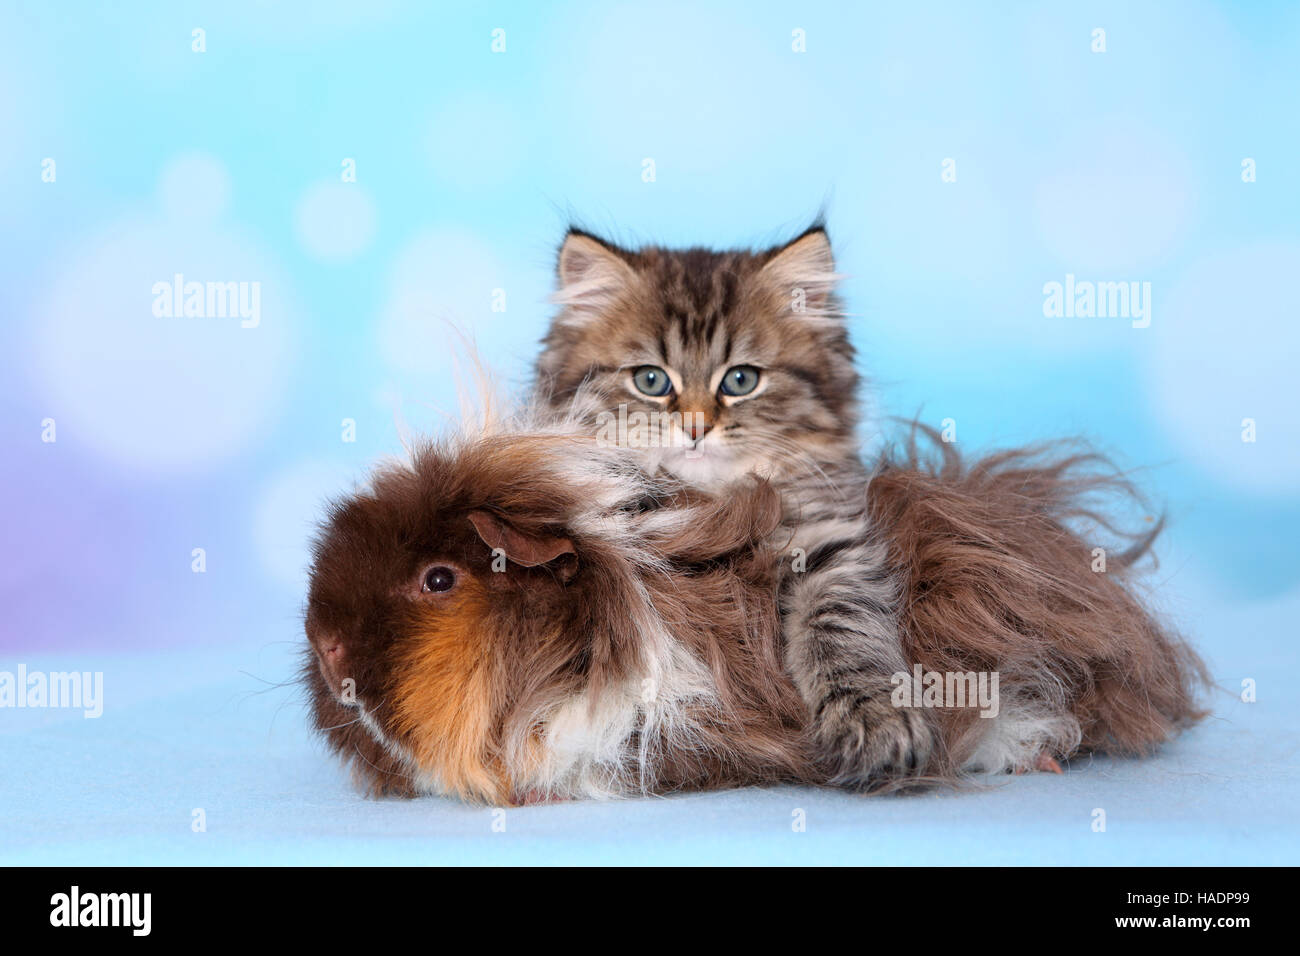 British Longhair and Long-haired Guinea Pig. Kitten (8 weeks old) and cavy on a light blue blanket. Studio picture against a blue background Stock Photo